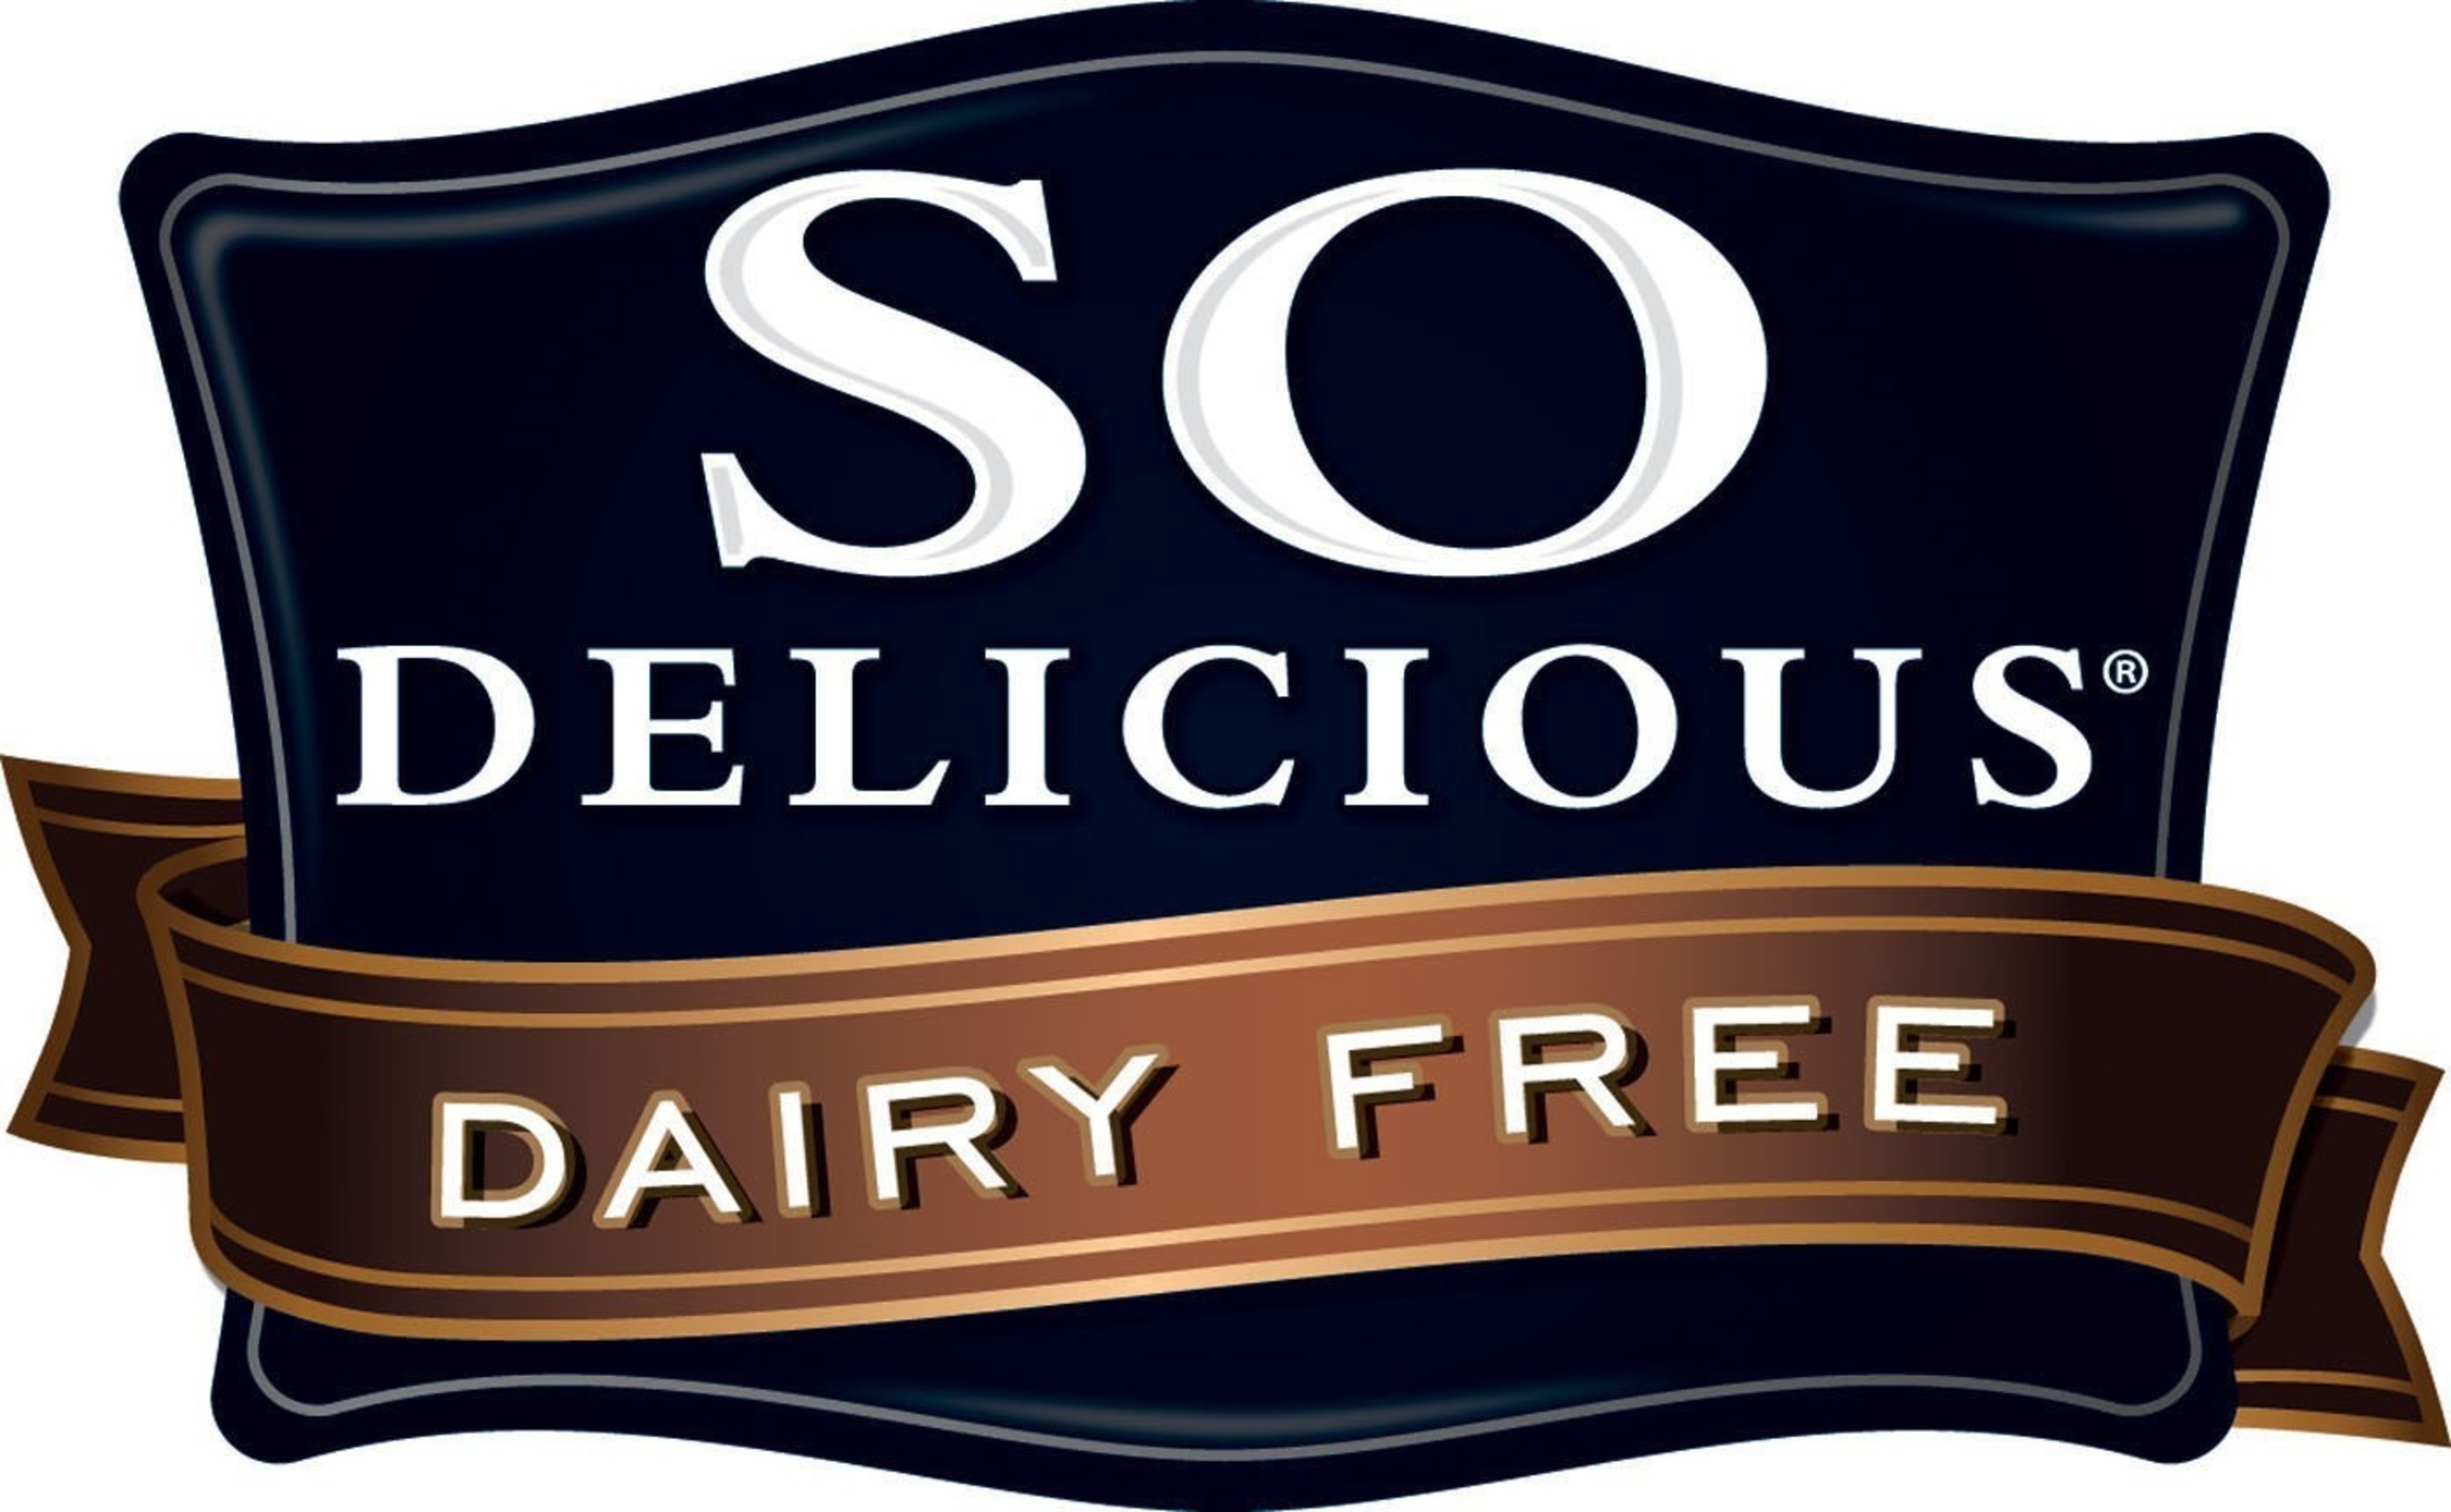 Based in Eugene, Oregon, privately held So Delicious(R) Dairy Free has been providing consumers with a broad selection of delicious alternatives to dairy-based foods and beverages since 1988. So Delicious Dairy Free products include dairy-free frozen desserts, beverages, cultured products, coffee creamers, and probiotic beverages. For full product offerings and complete nutritional information, please visit SoDeliciousDairyFree.com. (PRNewsFoto/So Delicious(R) Dairy Free)